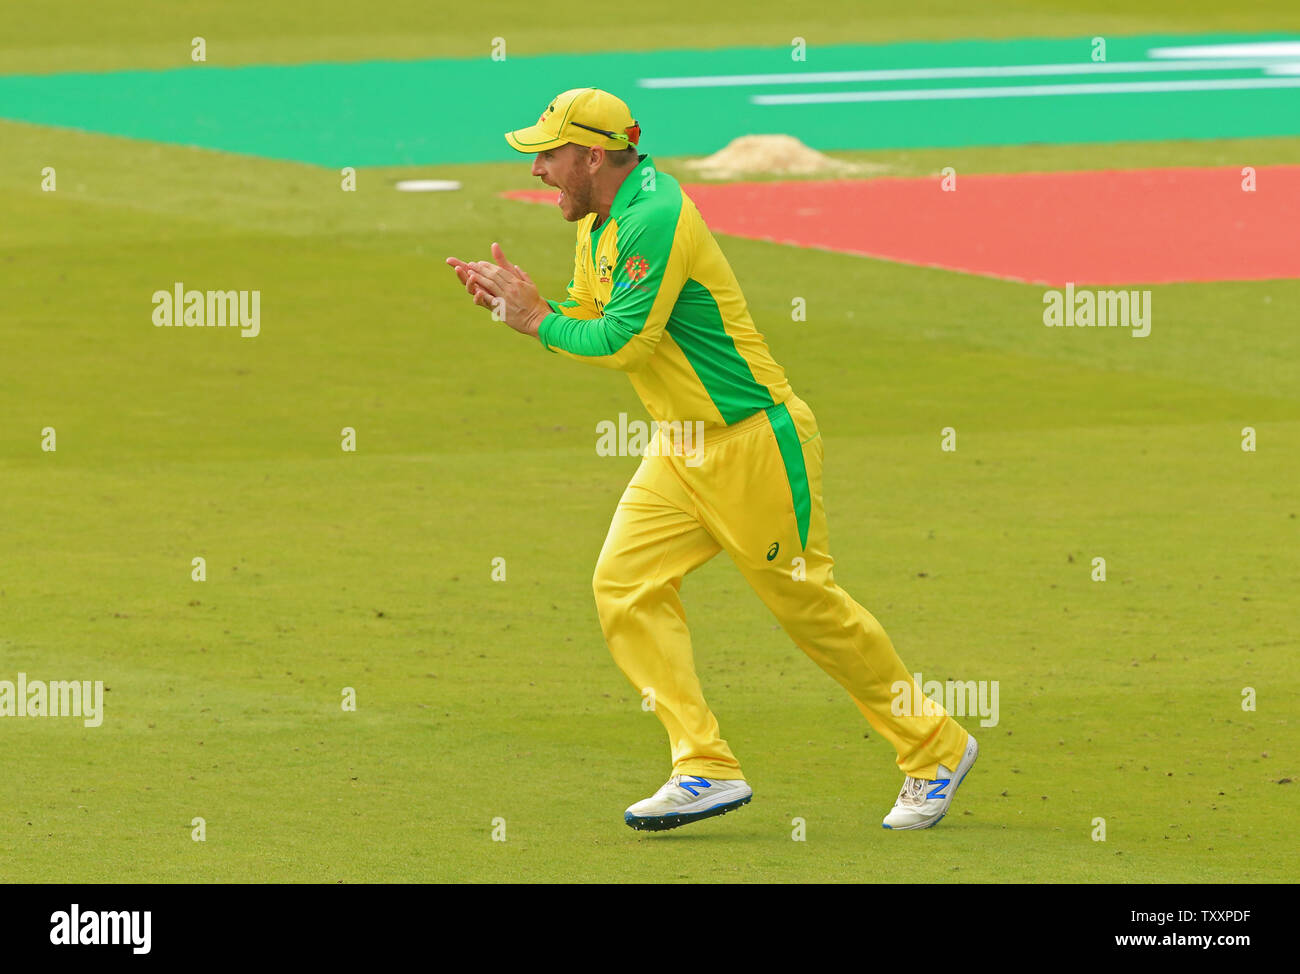 London, UK. 25th June, 2019. Aaron Finch of Australia celebrates his team winning during the England v Australia, ICC Cricket World Cup match, at Lords, London, England. Credit: Cal Sport Media/Alamy Live News Stock Photo